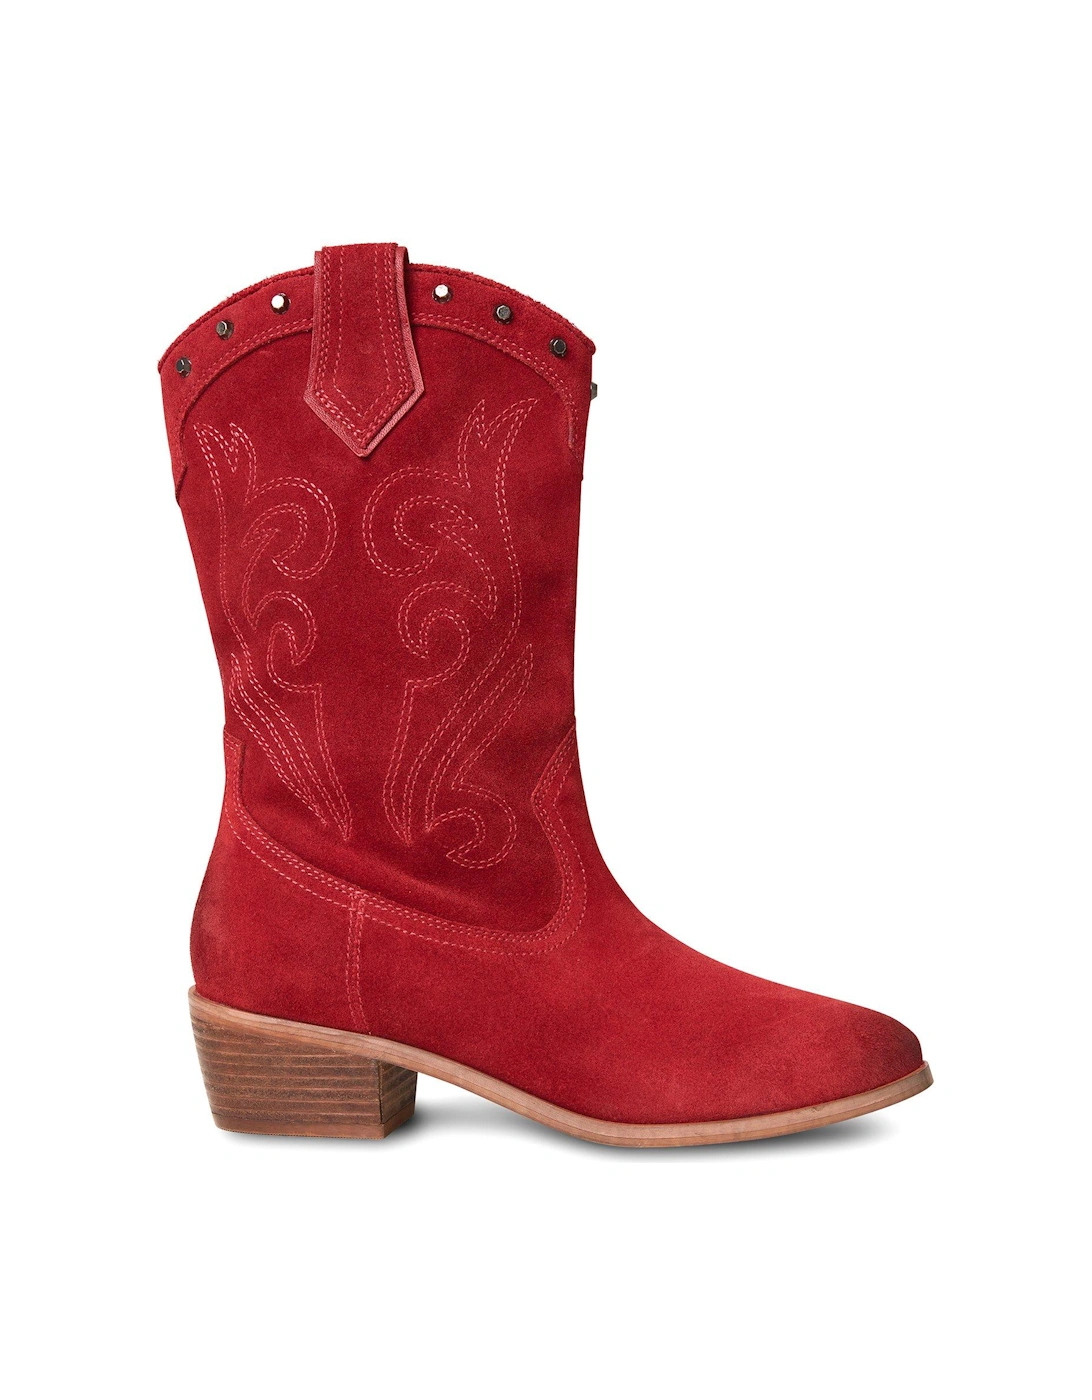 Bourbon Street Suede Boots - Red